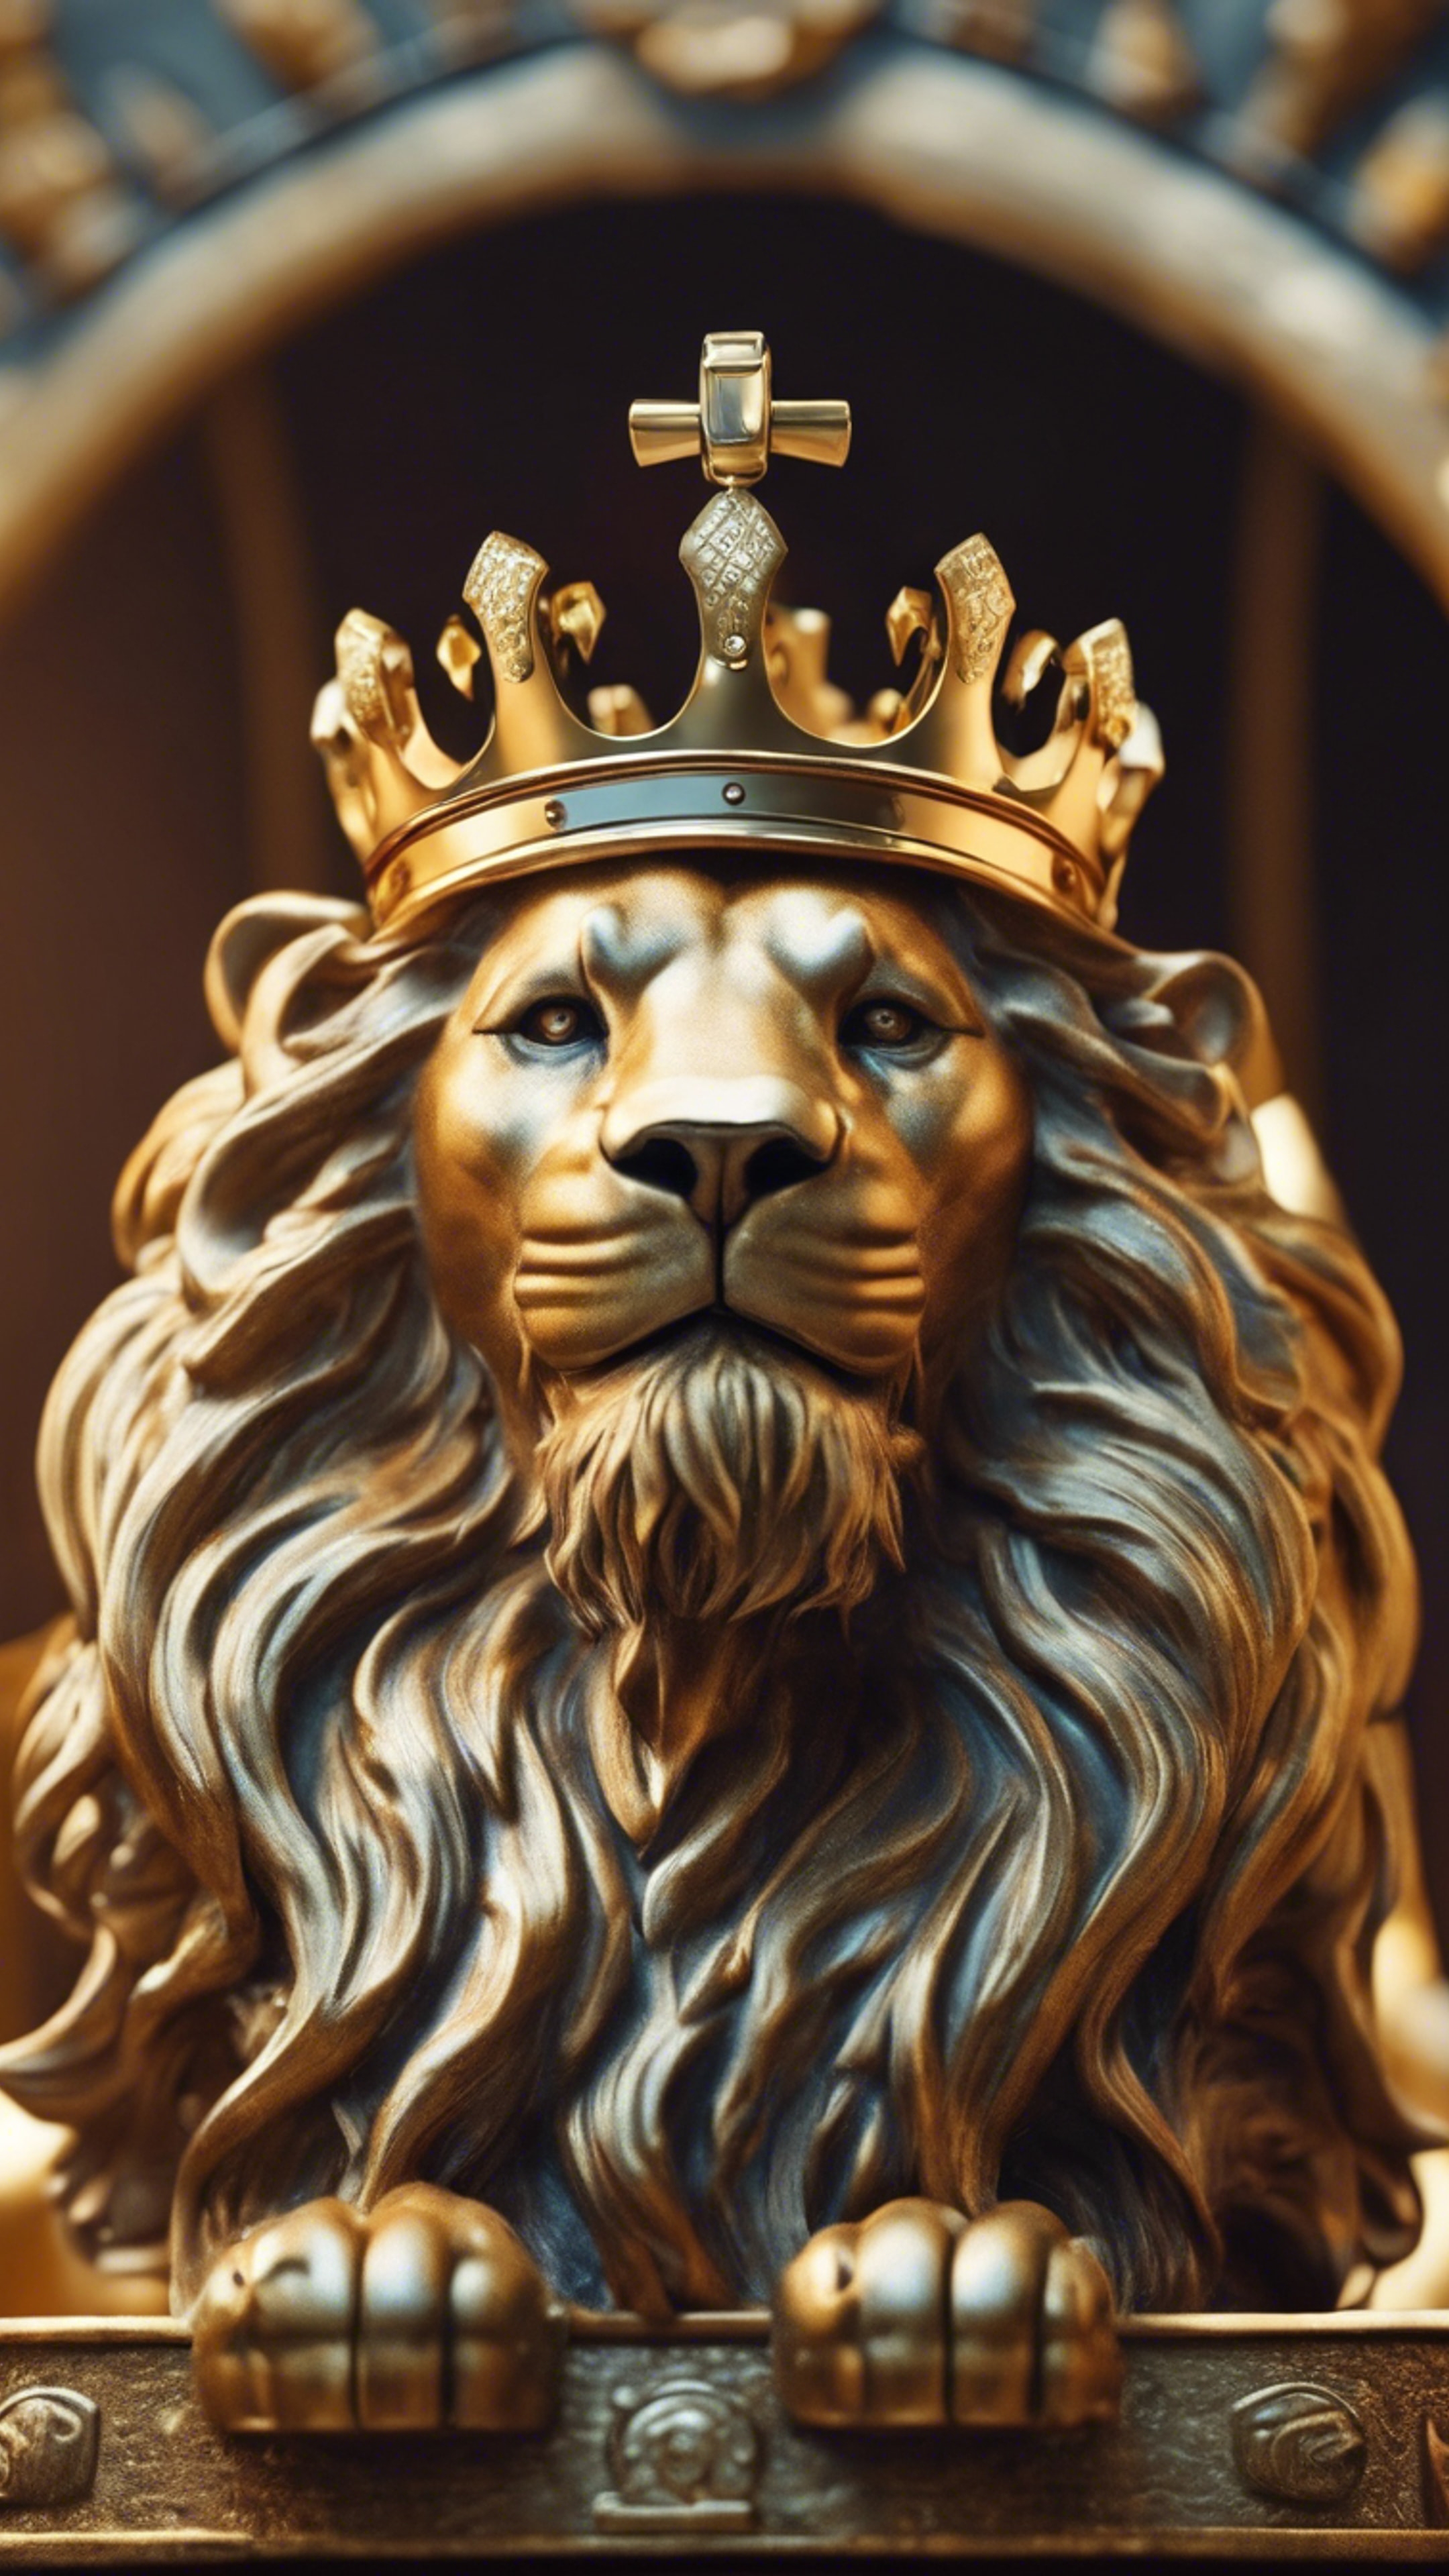 A king's golden crown with roaring lion emblem resting on his throne. Wallpaper[e084b131866d4f14bc42]